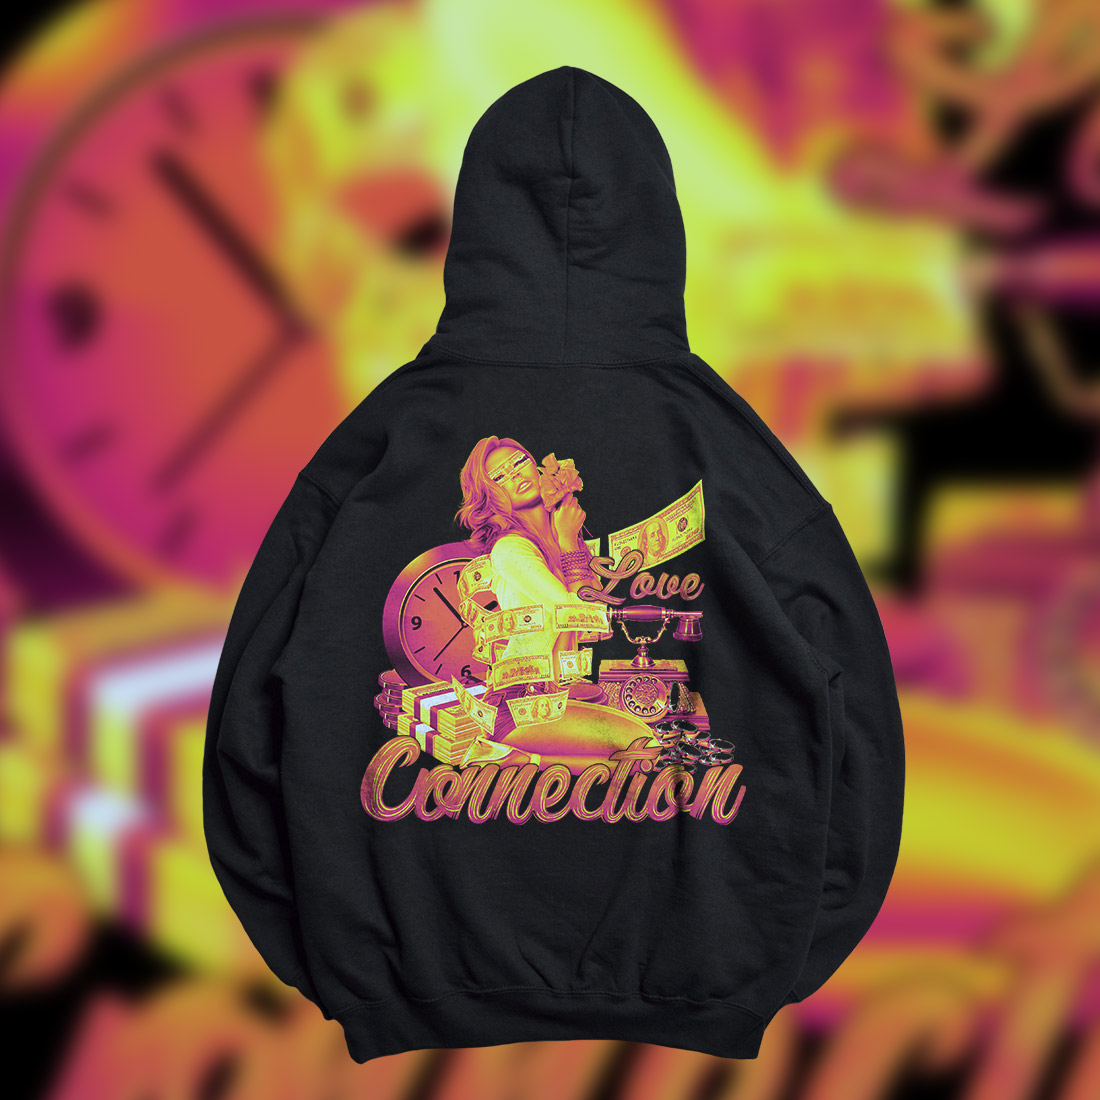 Love Connectionâ€“Urban Graphic Streetwear T-Shirt Design cover image.